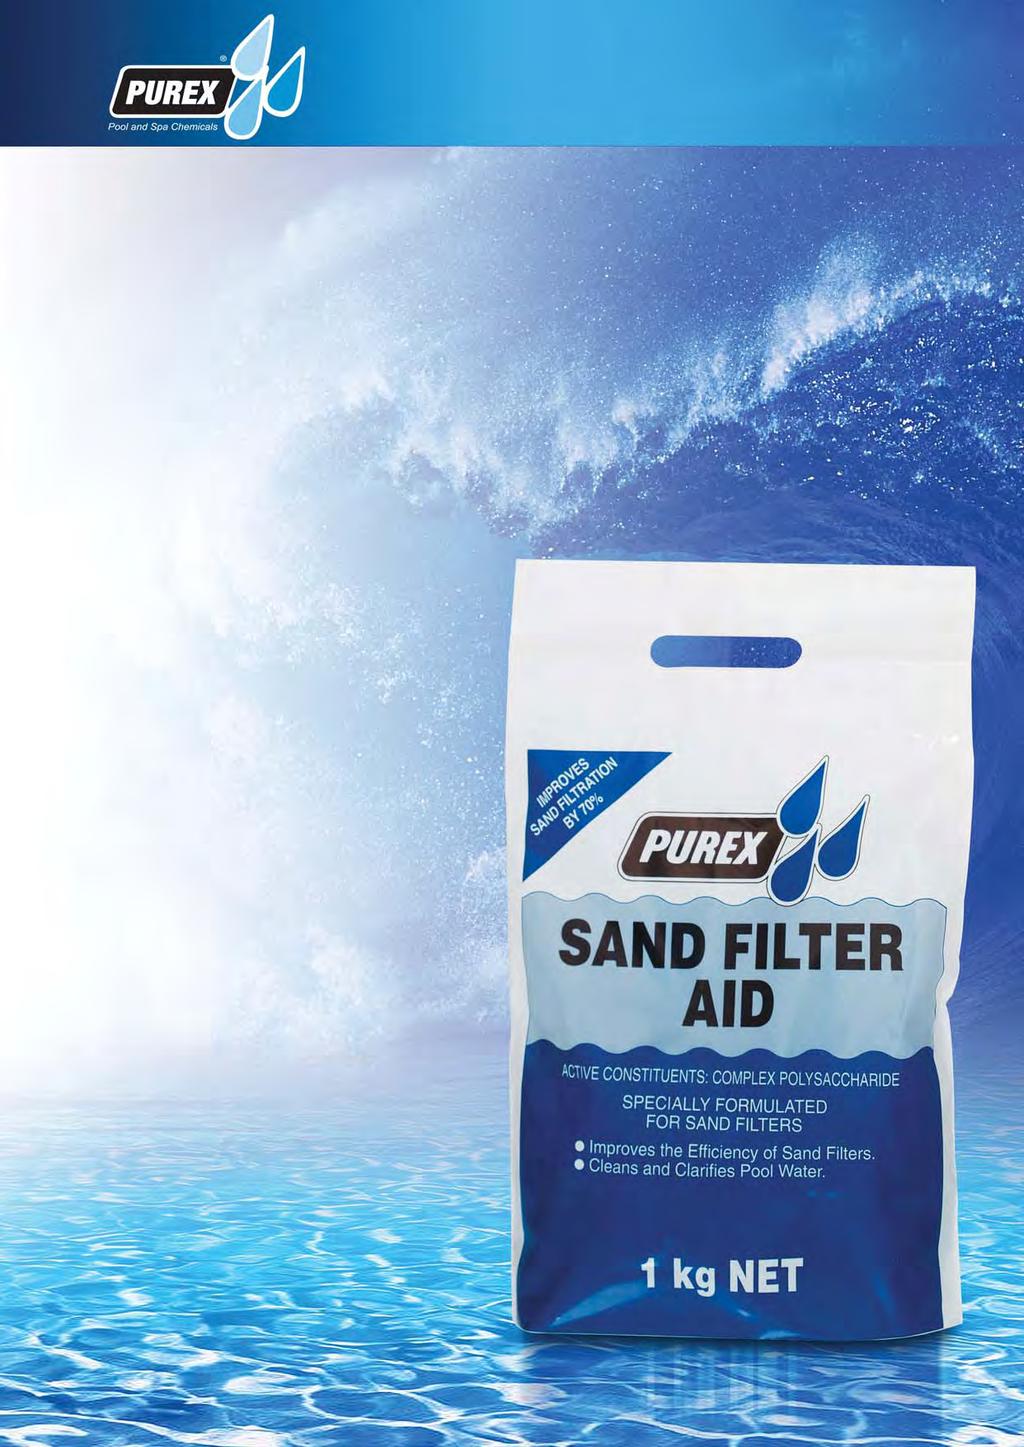 PUREX SAND FILTER AID Diatamaceous Earth with Cellulose USAGE ON: Sand Filters Helps the filter to filter to the finest micron Cloudy water or fine particles